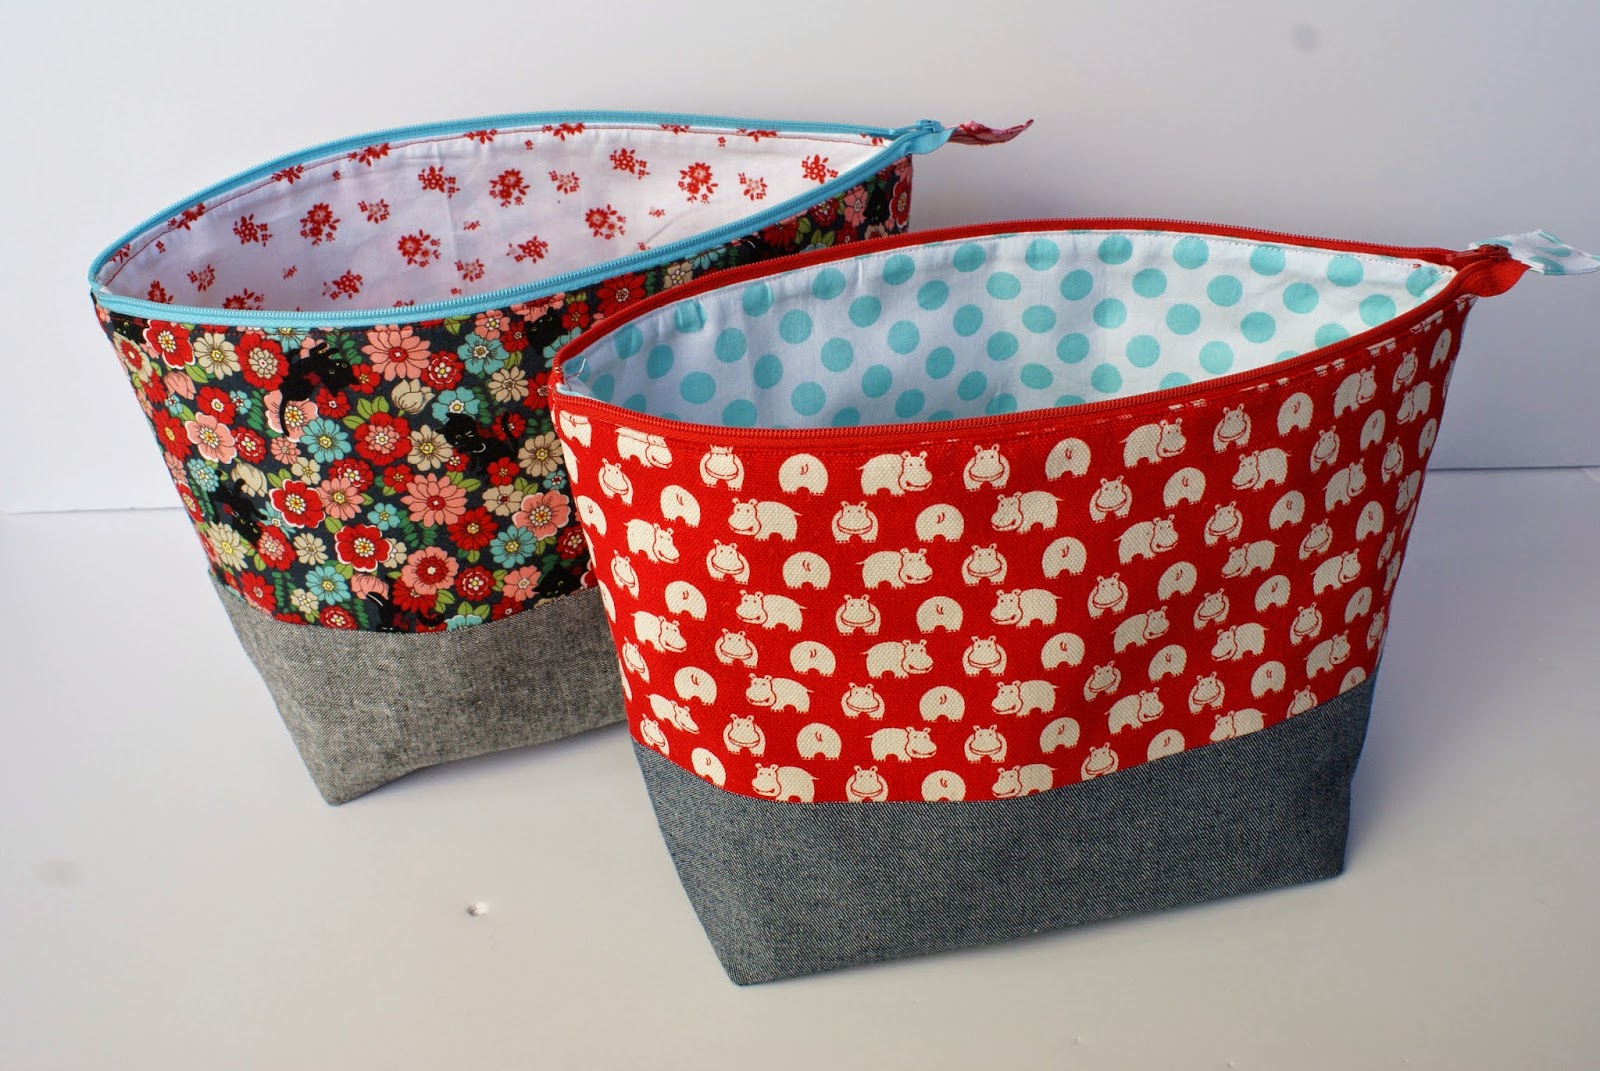 Dresden Lane: Two Winners and More Christmas Present Sewing